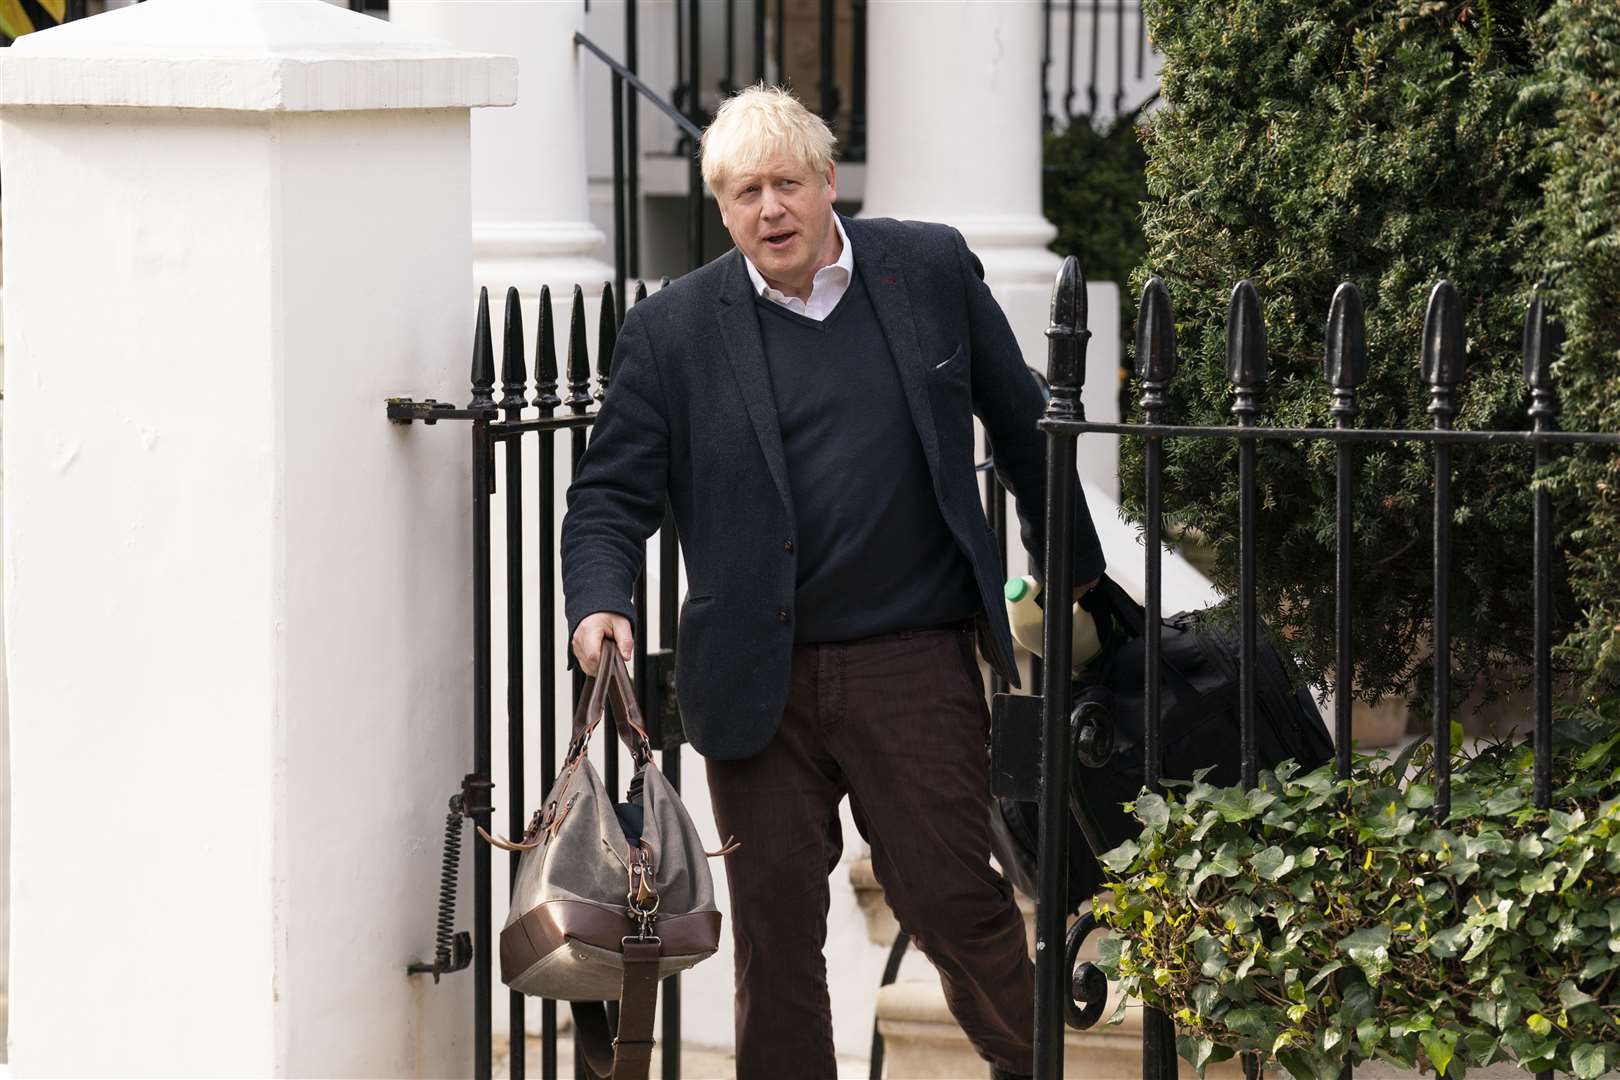 There has been speculation that Boris Johnson considered running for his former seat of Henley at the next election (Kirsty O’Connor/PA)